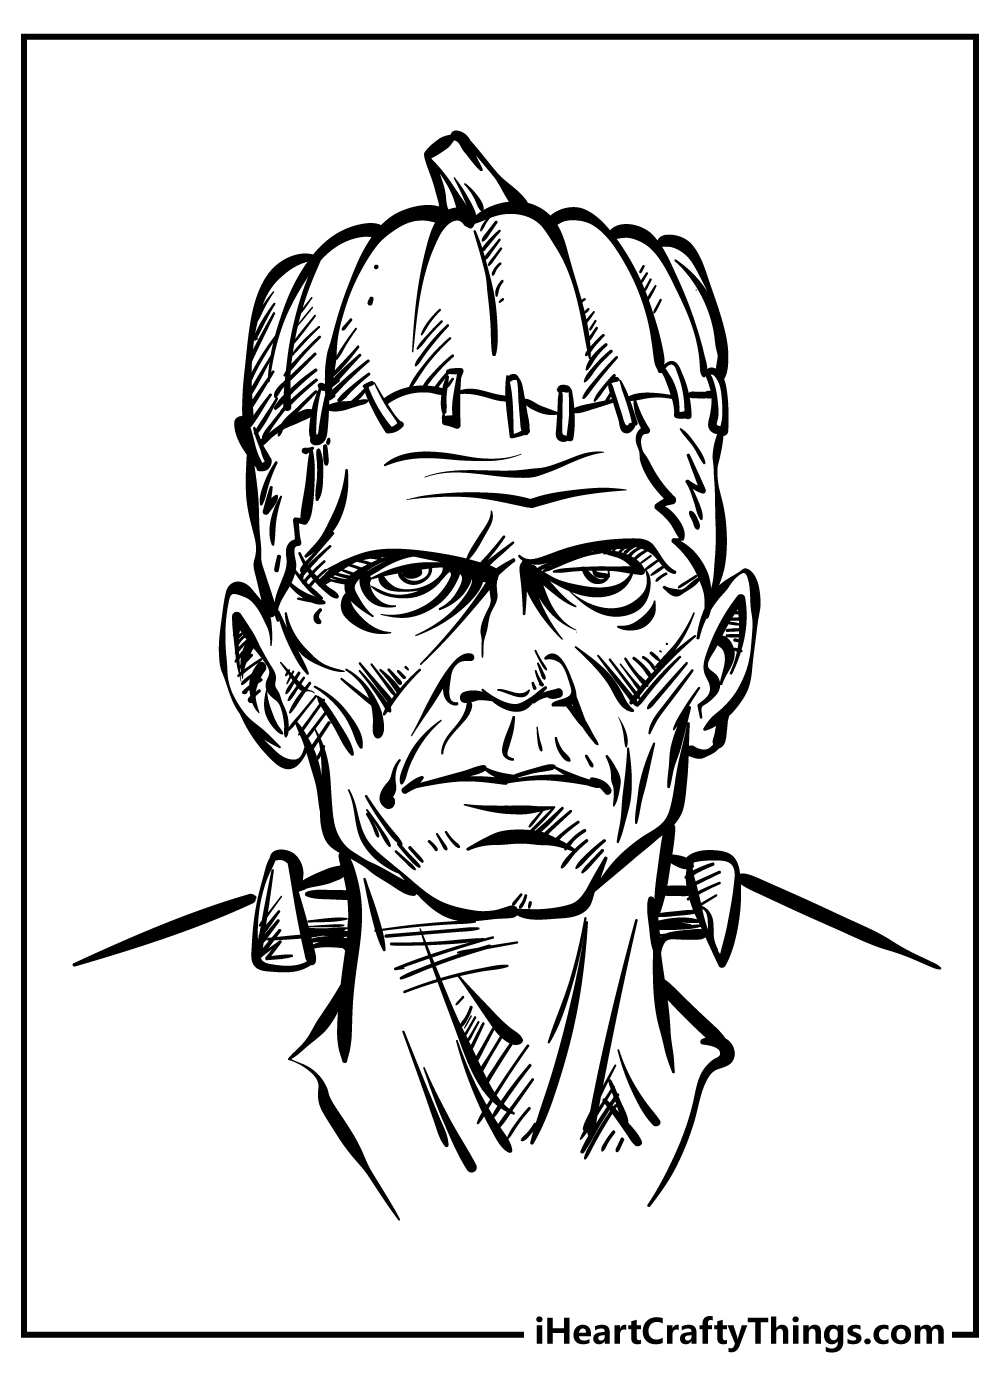 Frankenstein Coloring Book for adults free download